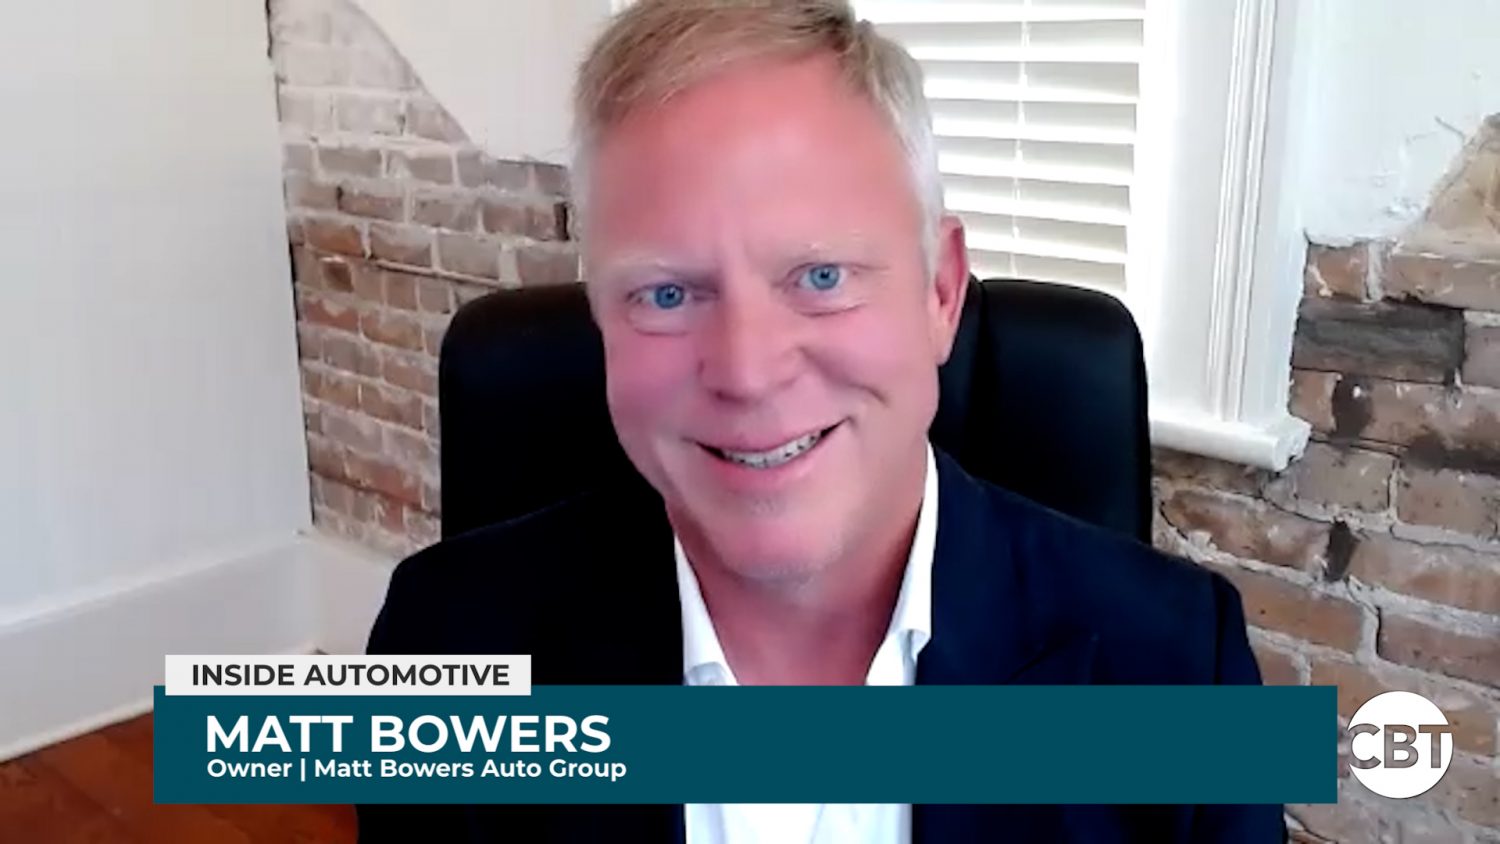 On today’s Inside Automotive, we’re joined by Matt Bowers to discuss the new volume and other business happening for the Group.